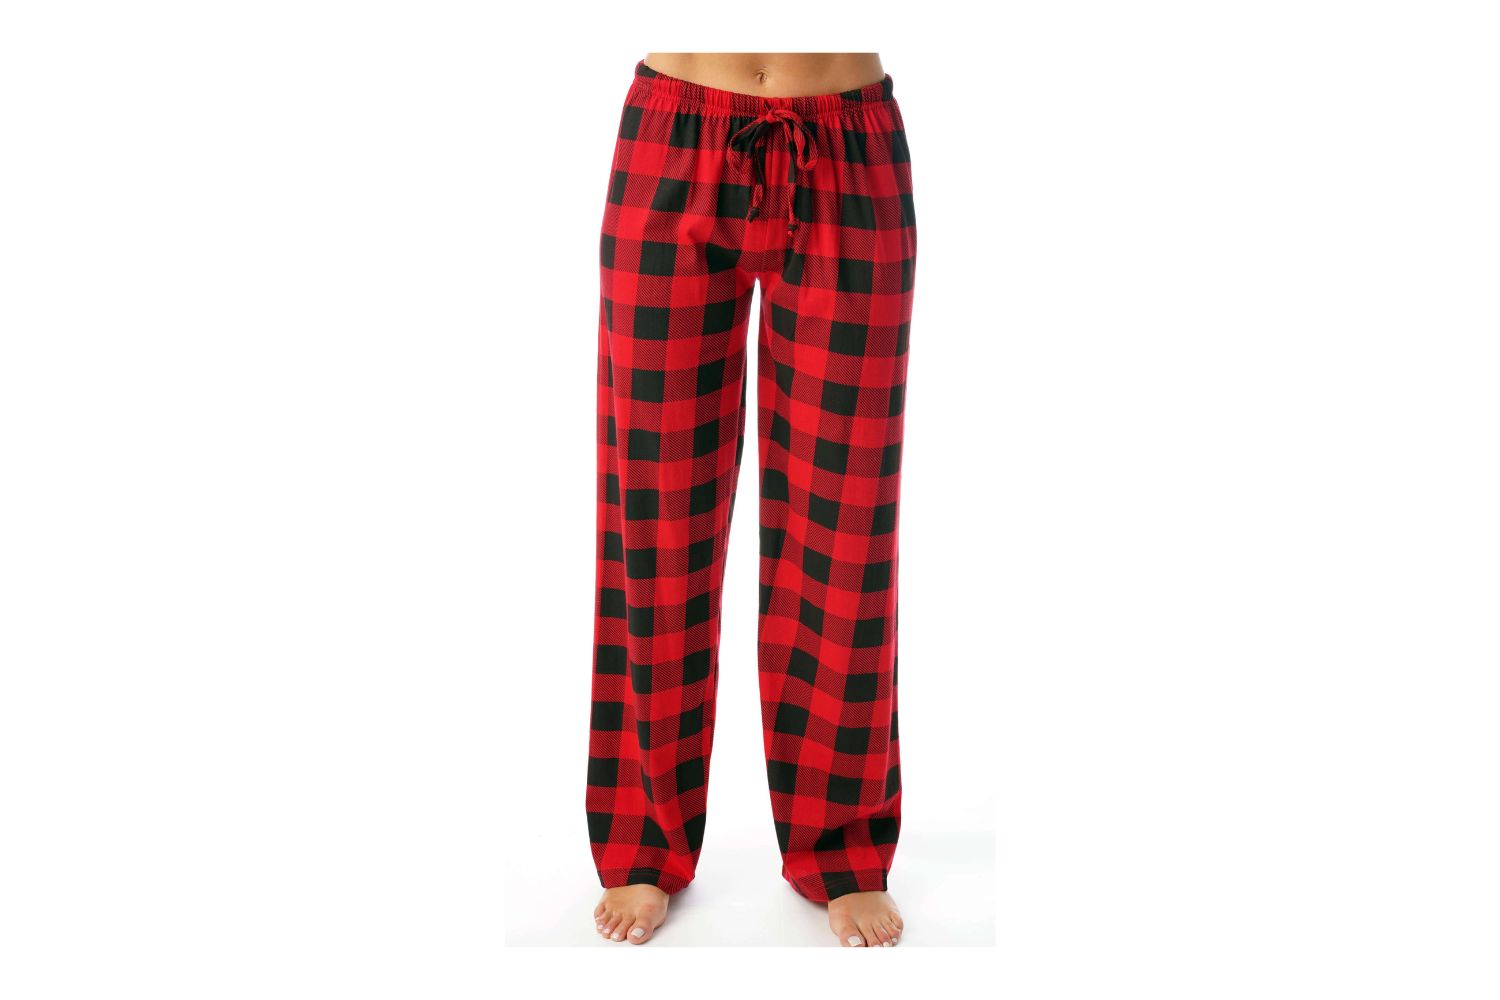 13-mind-blowing-facts-about-plaid-pajama-pants